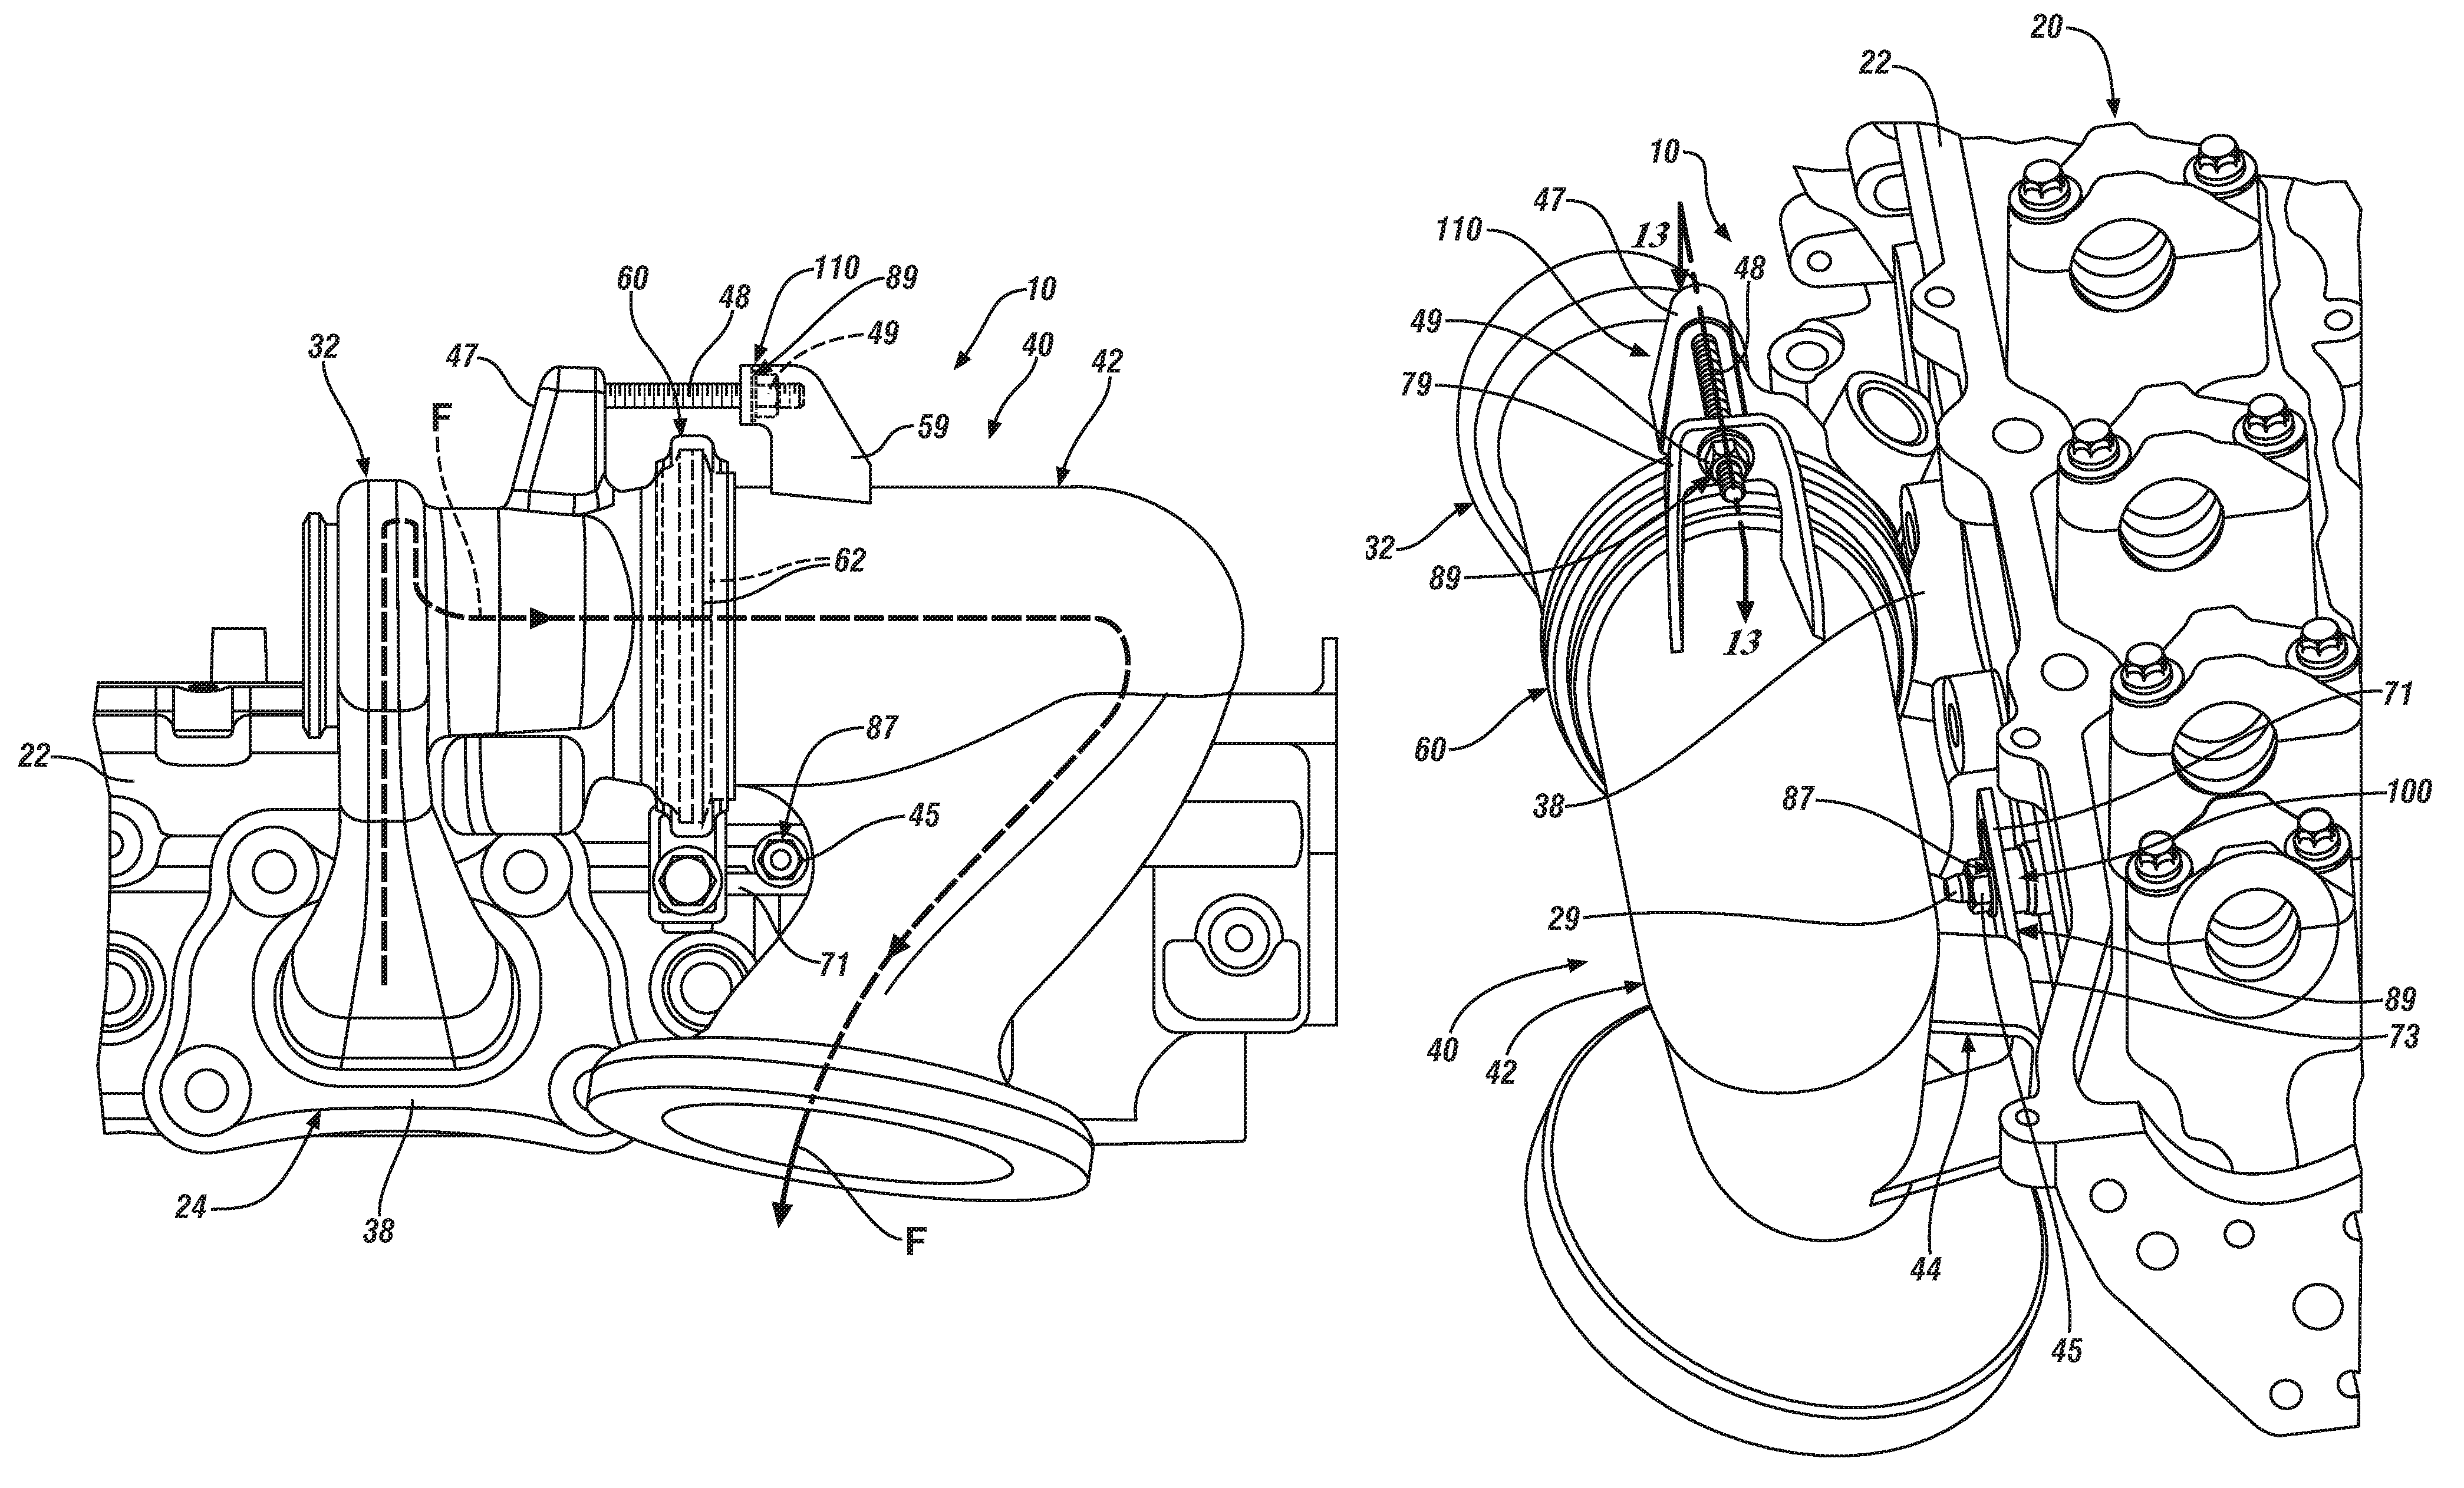 Engine assembly and method of making